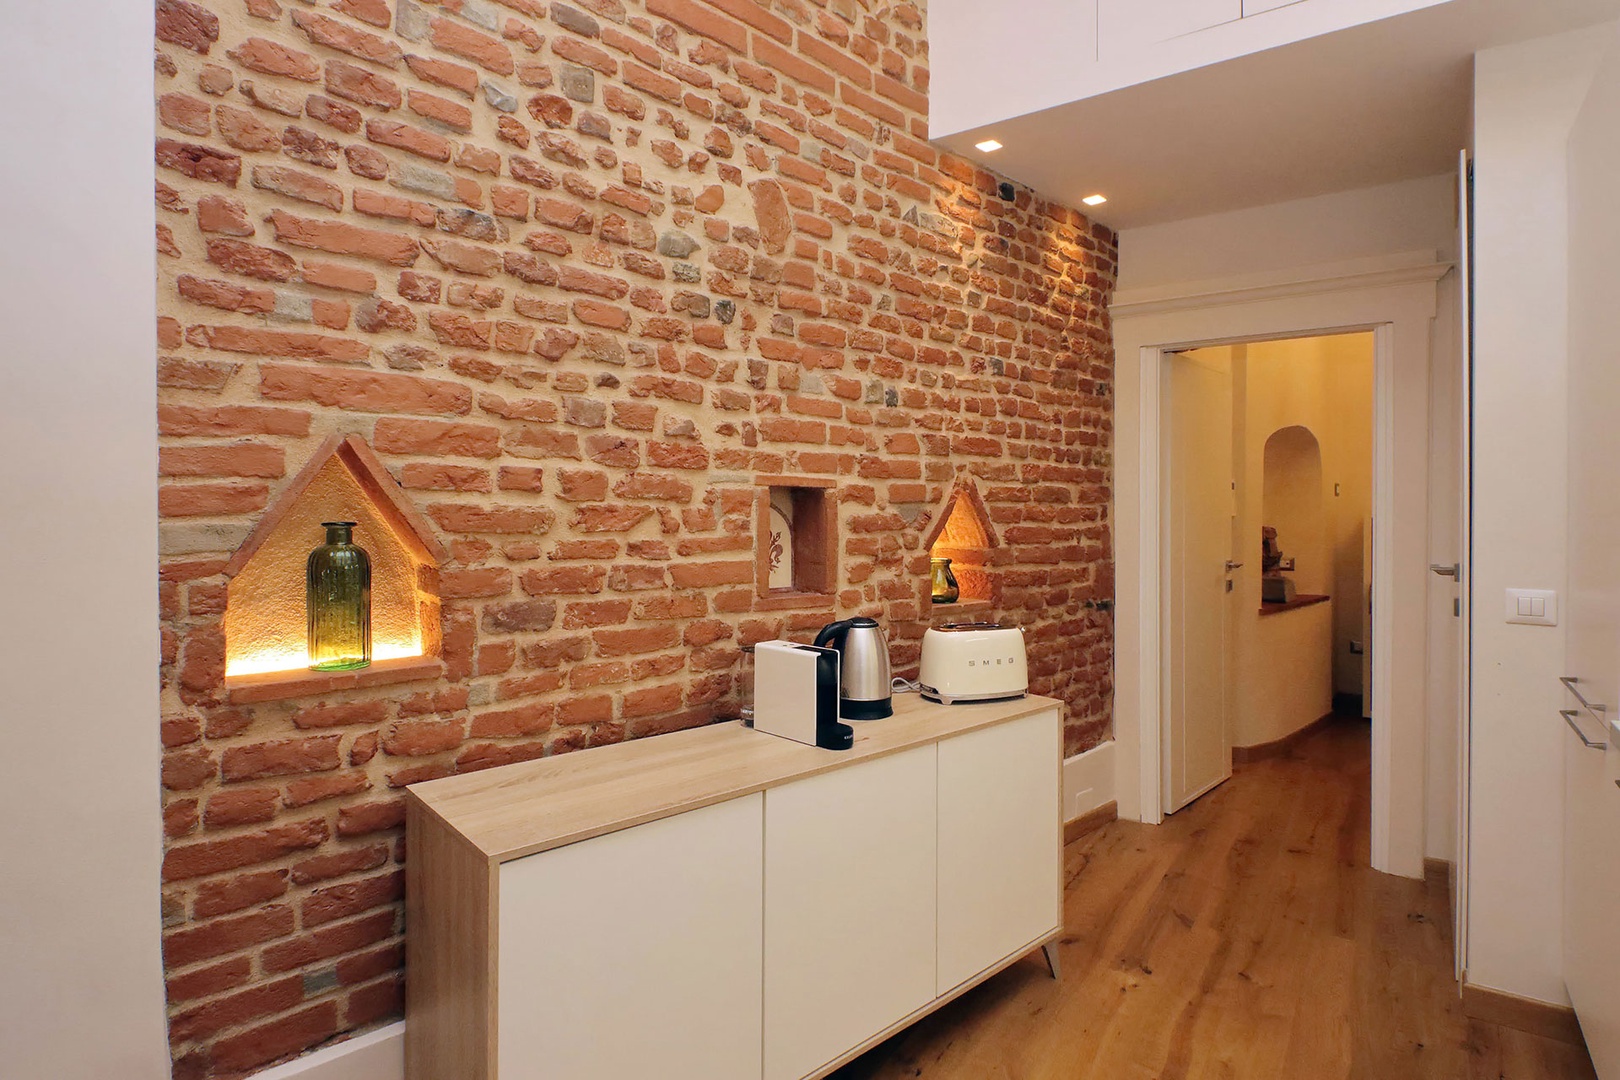 Exposed brick and inlets add to the charm of the Pierino